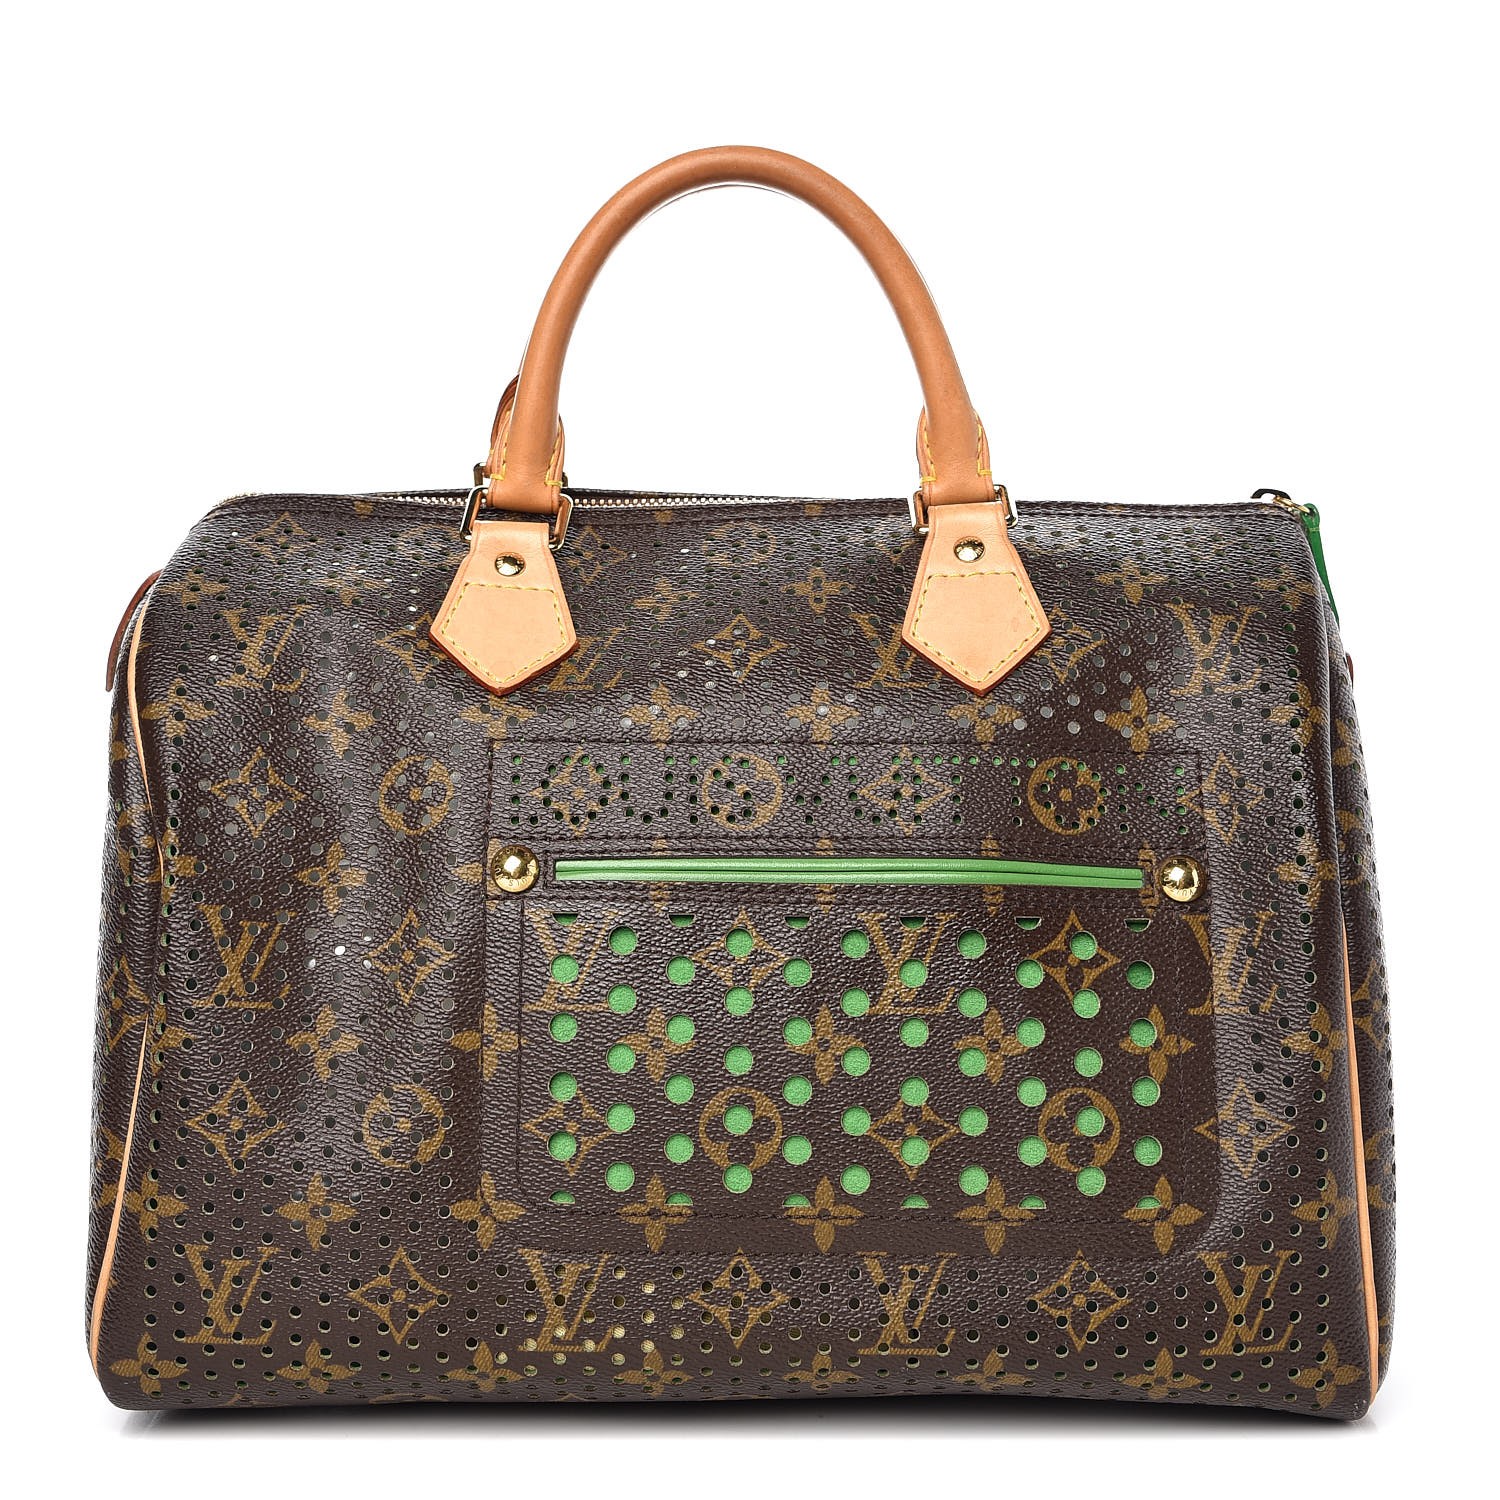 Louis Vuitton Monogram Perforated Pochette Shoulder Bag in Brown / Green /  Gold